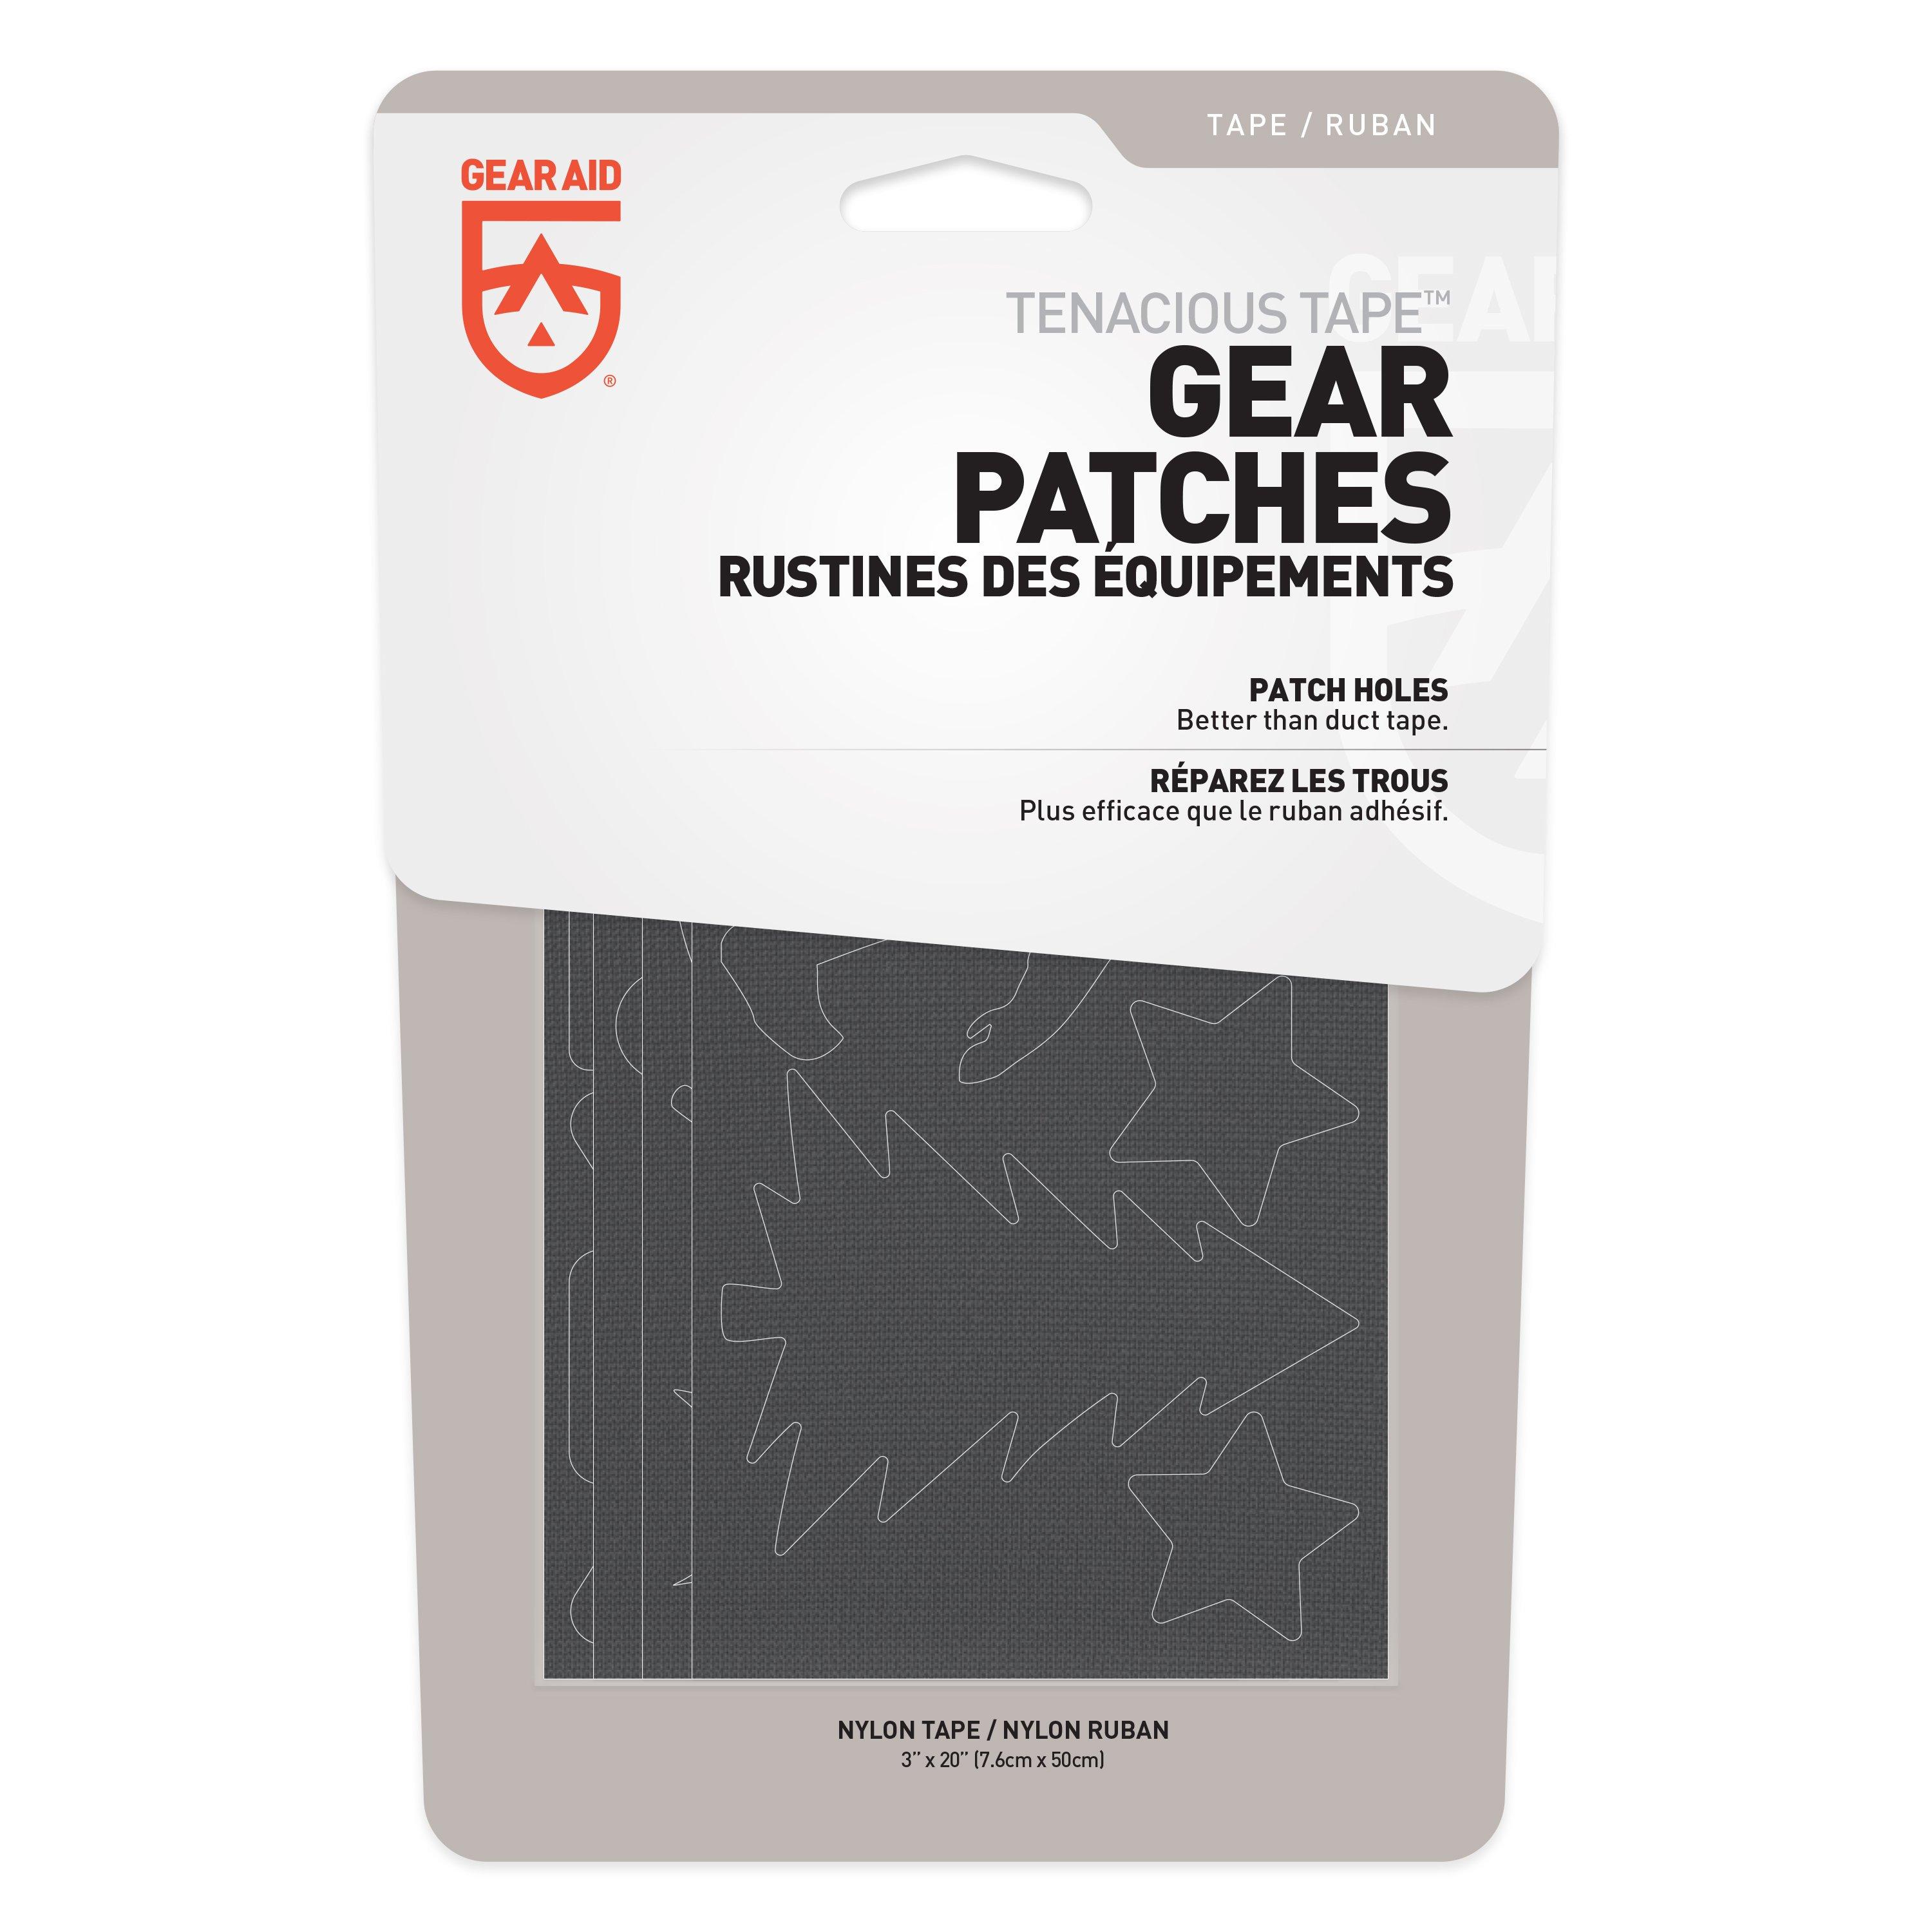  Camping Gear Patches